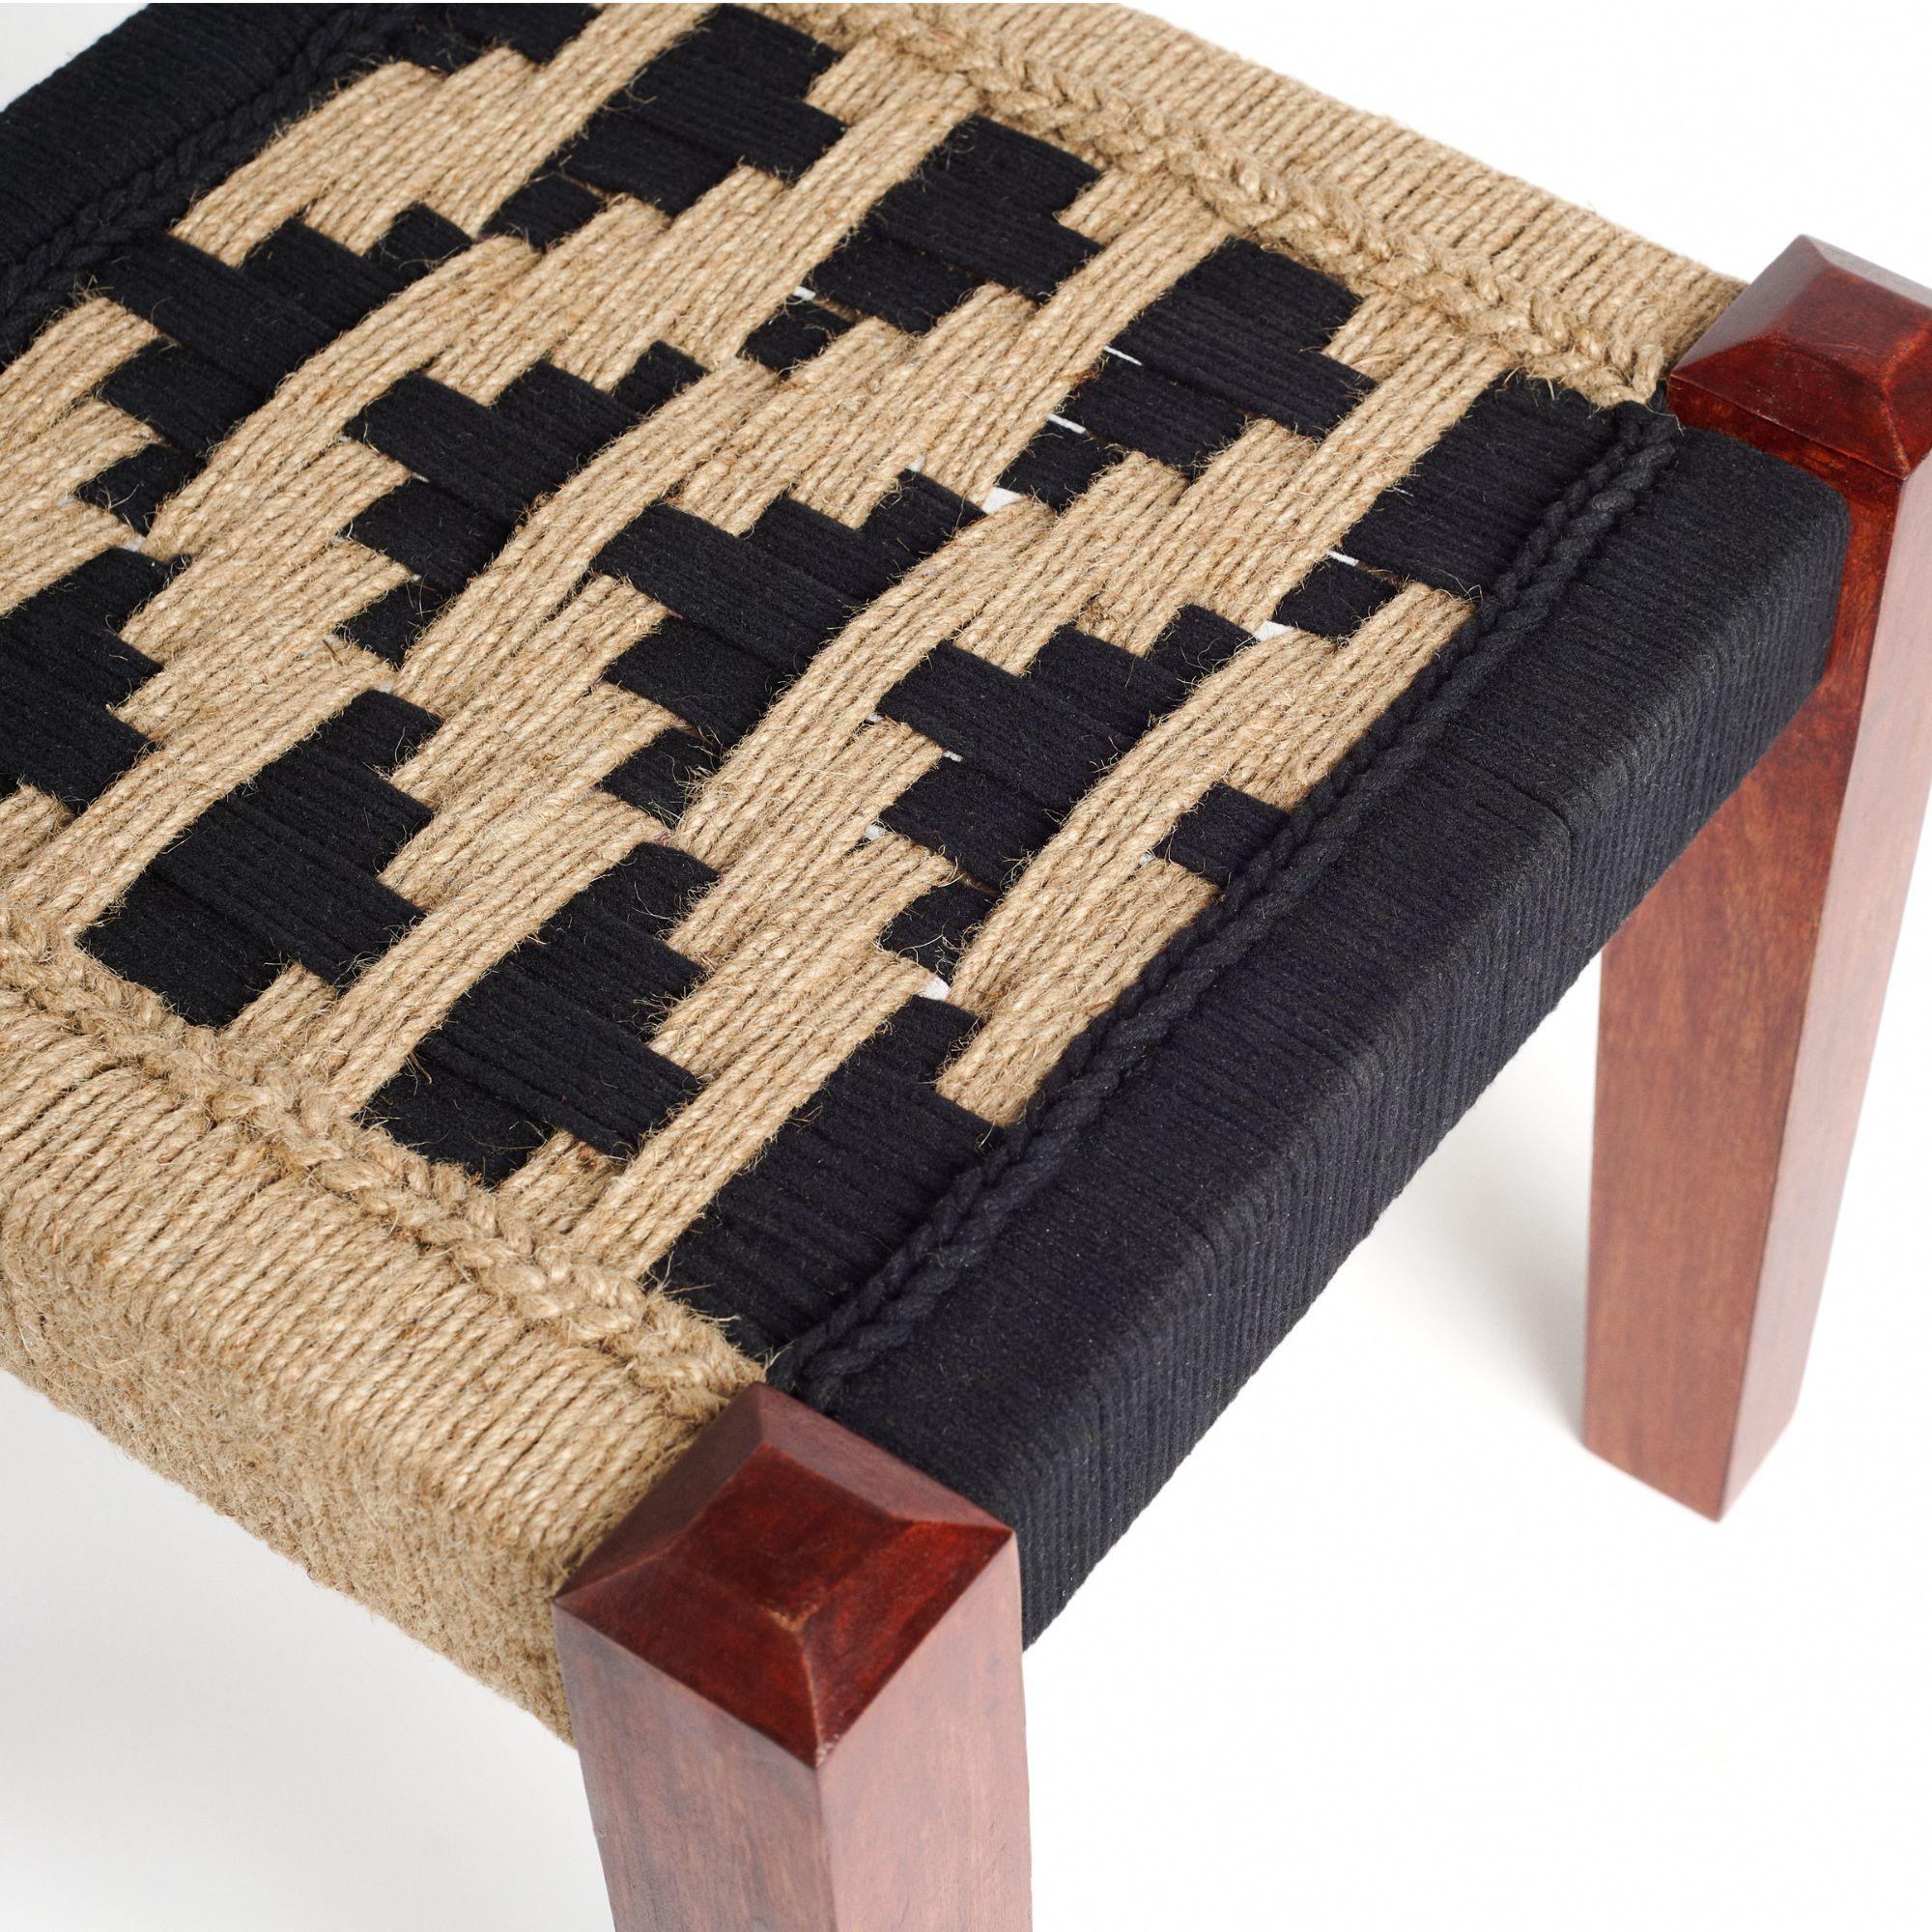 Indian Ālambh Black Stool Handwoven in Jute and Cotton by Artisans For Sale